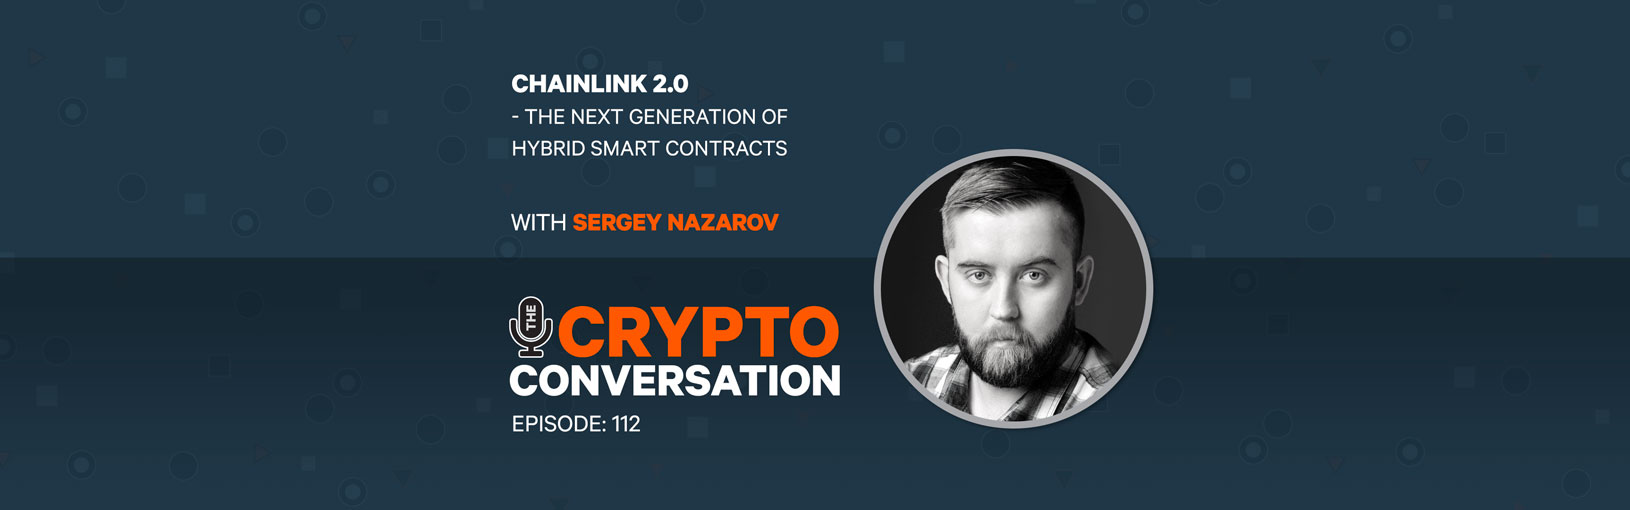 Chainlink 2.0 – The next generation of hybrid smart contracts